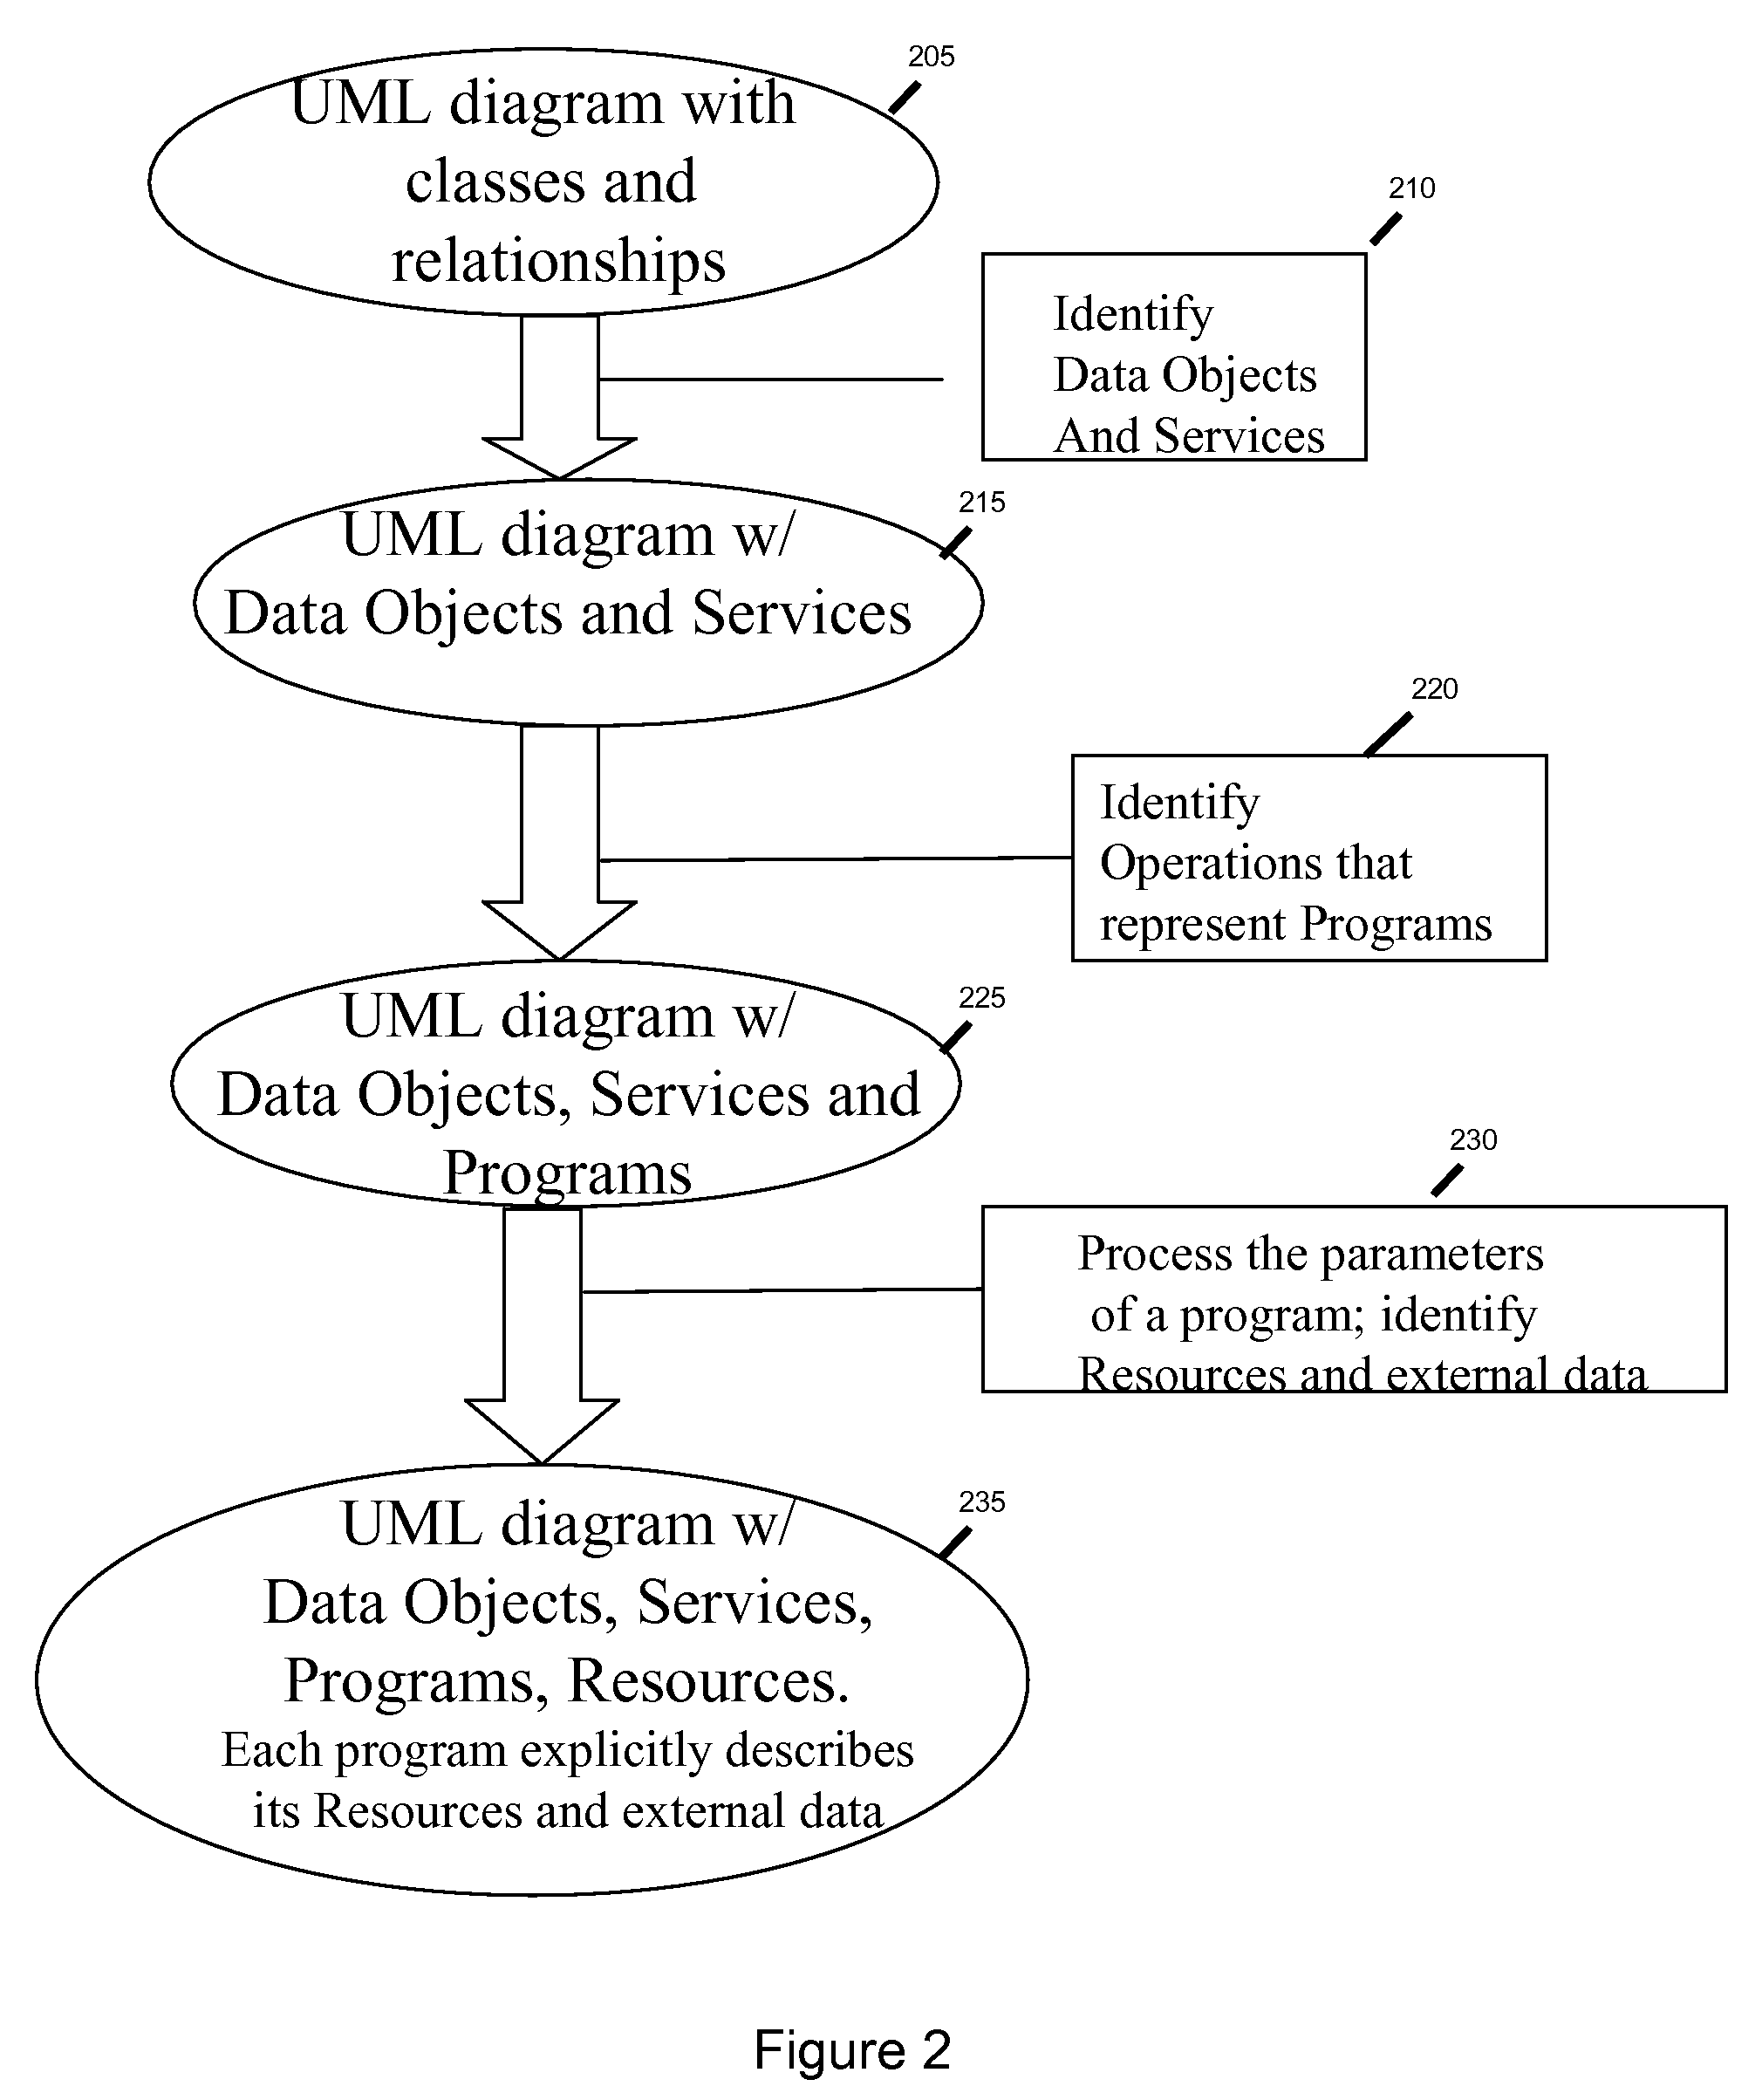 Method and system to modelize resources and external data of a program for procedural language coding